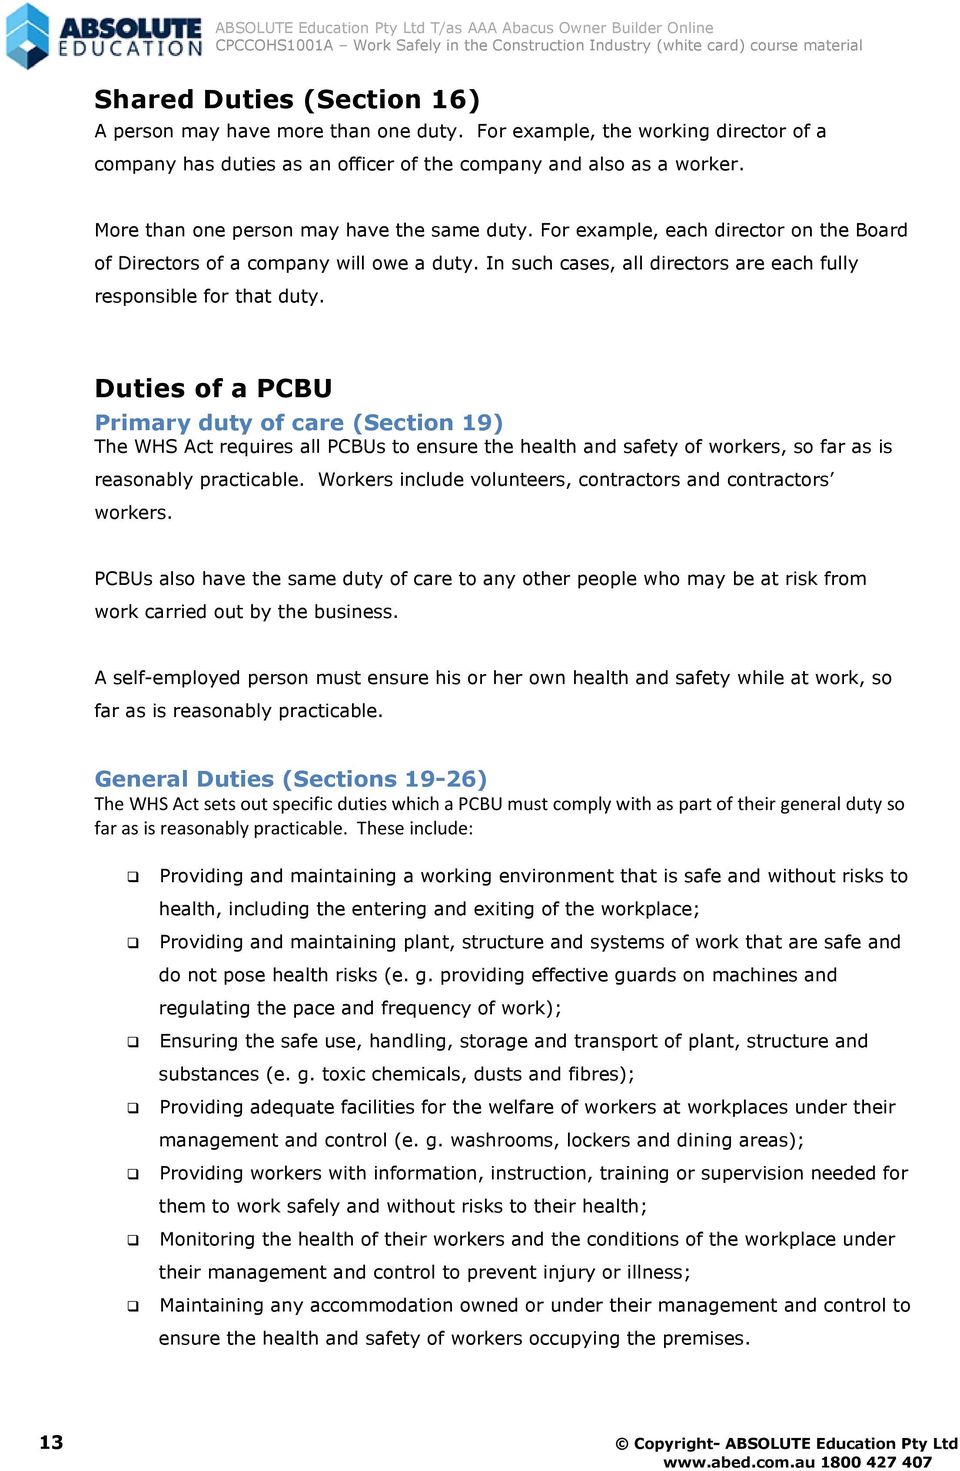 Duties of a PCBU Primary duty of care (Section 19) The WHS Act requires all PCBUs to ensure the health and safety of workers, so far as is reasonably practicable.